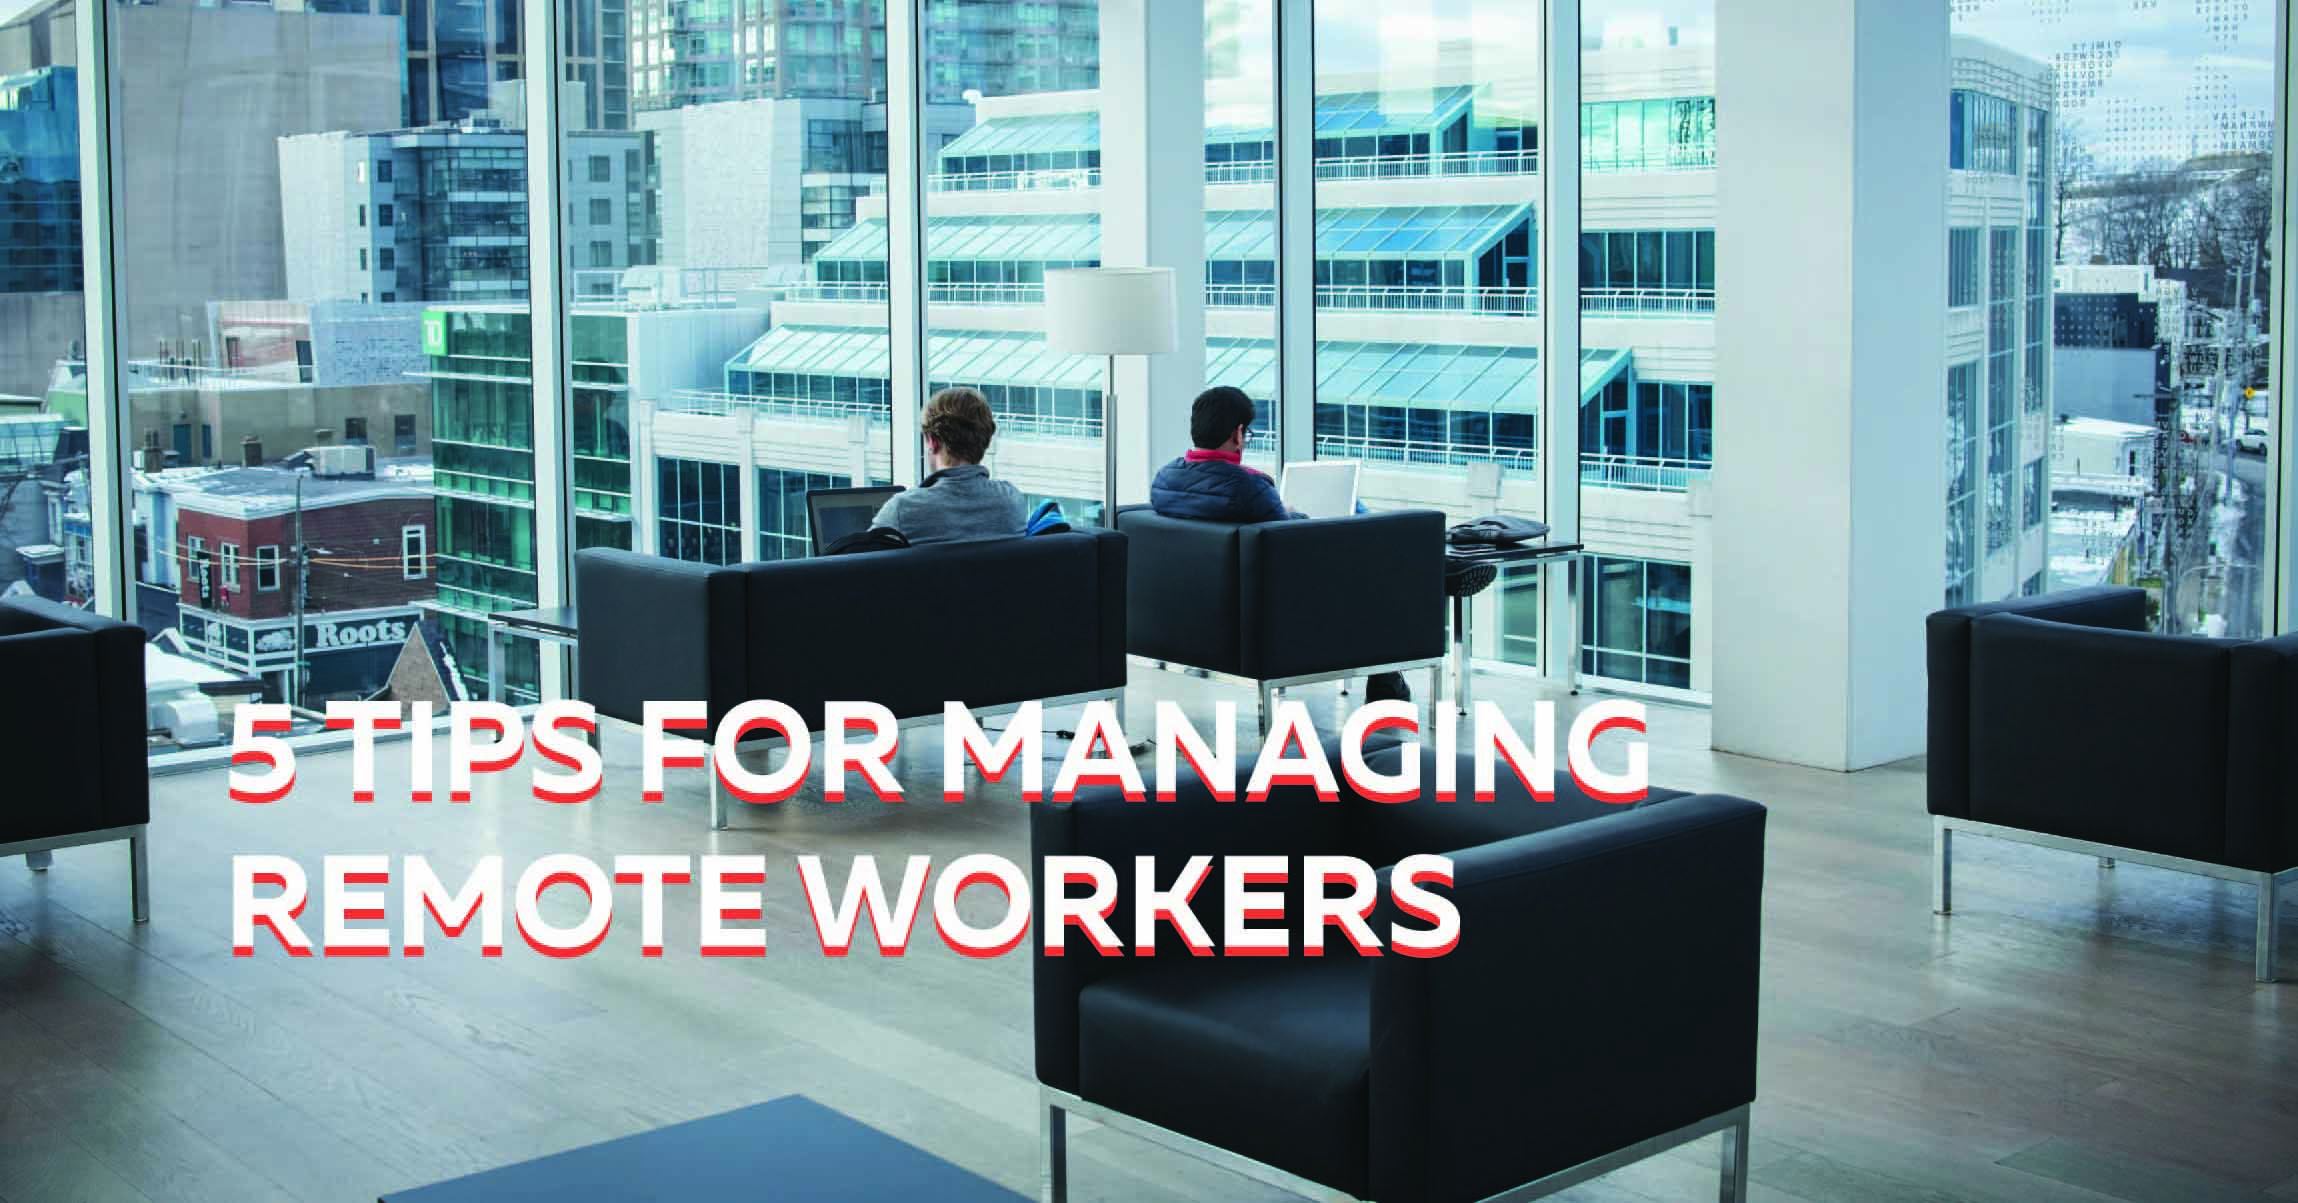 Two people work individually on their laptop computers in the lobby of a modern office space with text 5 Tips for Managing Remote Workers